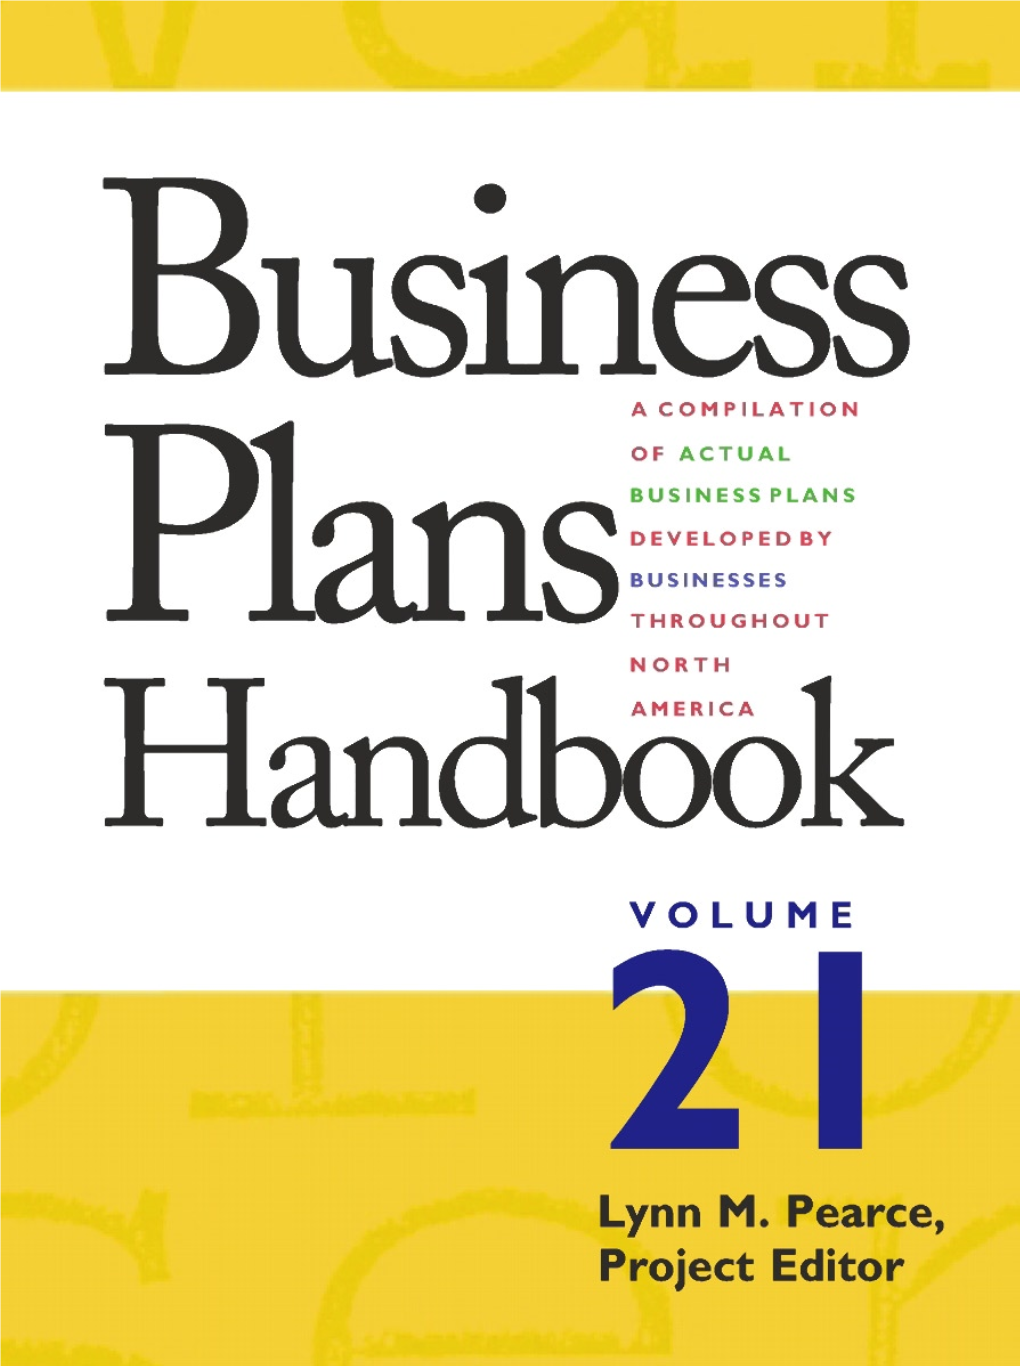 Business Plans Handbook, Volume 21 ª 2011 Gale, Cengage Learning